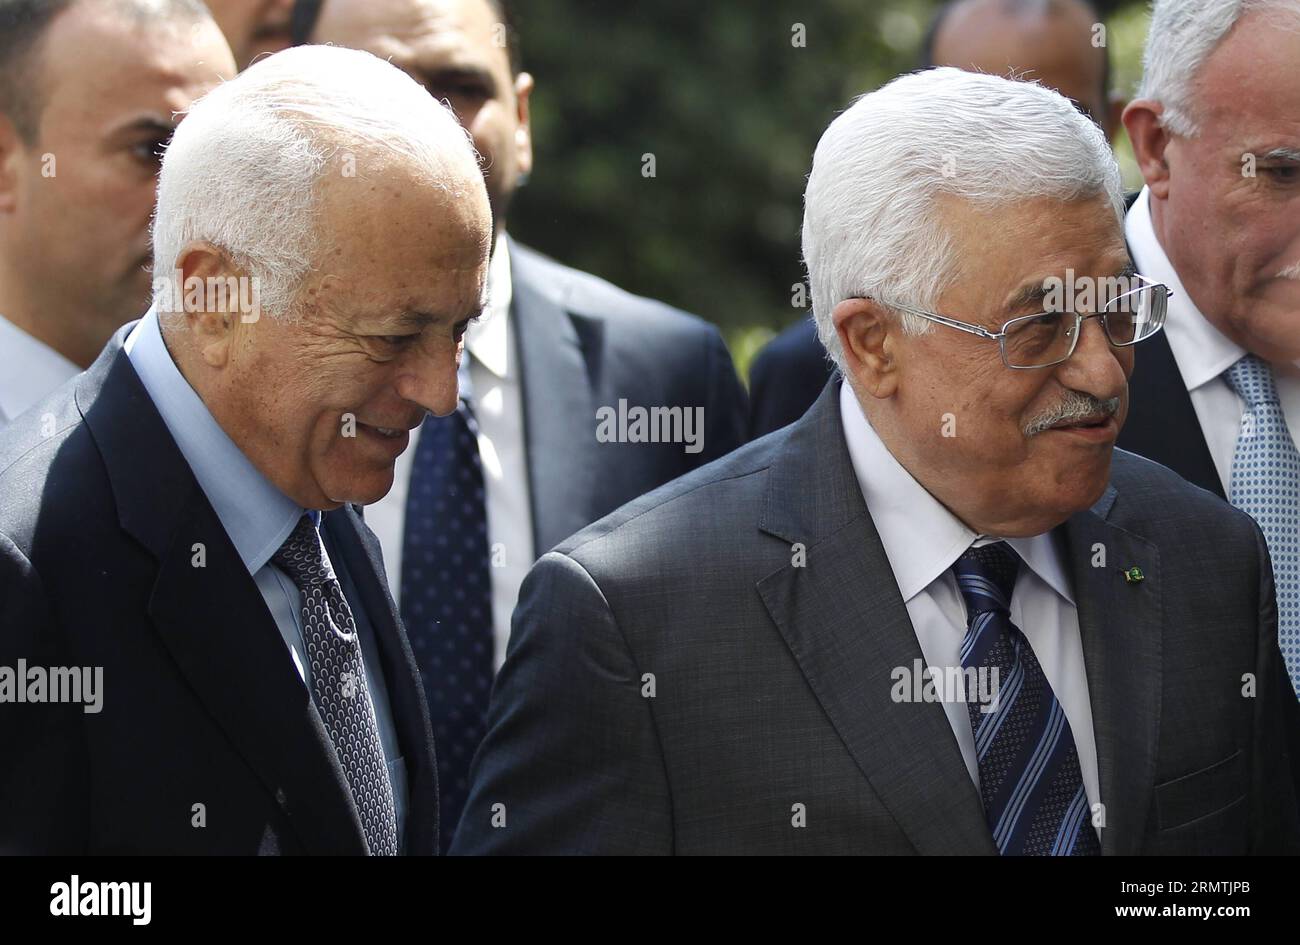 (140907) -- CAIRO, Sept. 7, 2014 -- Arab League Secretary General Nabil al-Arabi (L) and Palestinian President Mahmoud Abbas (R) walk into an an Arab League emergency meeting in Cairo, Egypt, Sept. 7, 2014. Arab foreign ministers were expected to issue a resolution to confront militants overrunning large areas of Iraq and Syria and declared a cross-border Islamic States. ) EGYPT-ARAB LEAGUE-EMERGENCY MEETING AhmedxGomaa PUBLICATIONxNOTxINxCHN   Cairo Sept 7 2014 Arab League Secretary General Nabil Al Arabi l and PALESTINIAN President Mahmoud Abbas r Walk into to to Arab League EMERGENCY Meetin Stock Photo